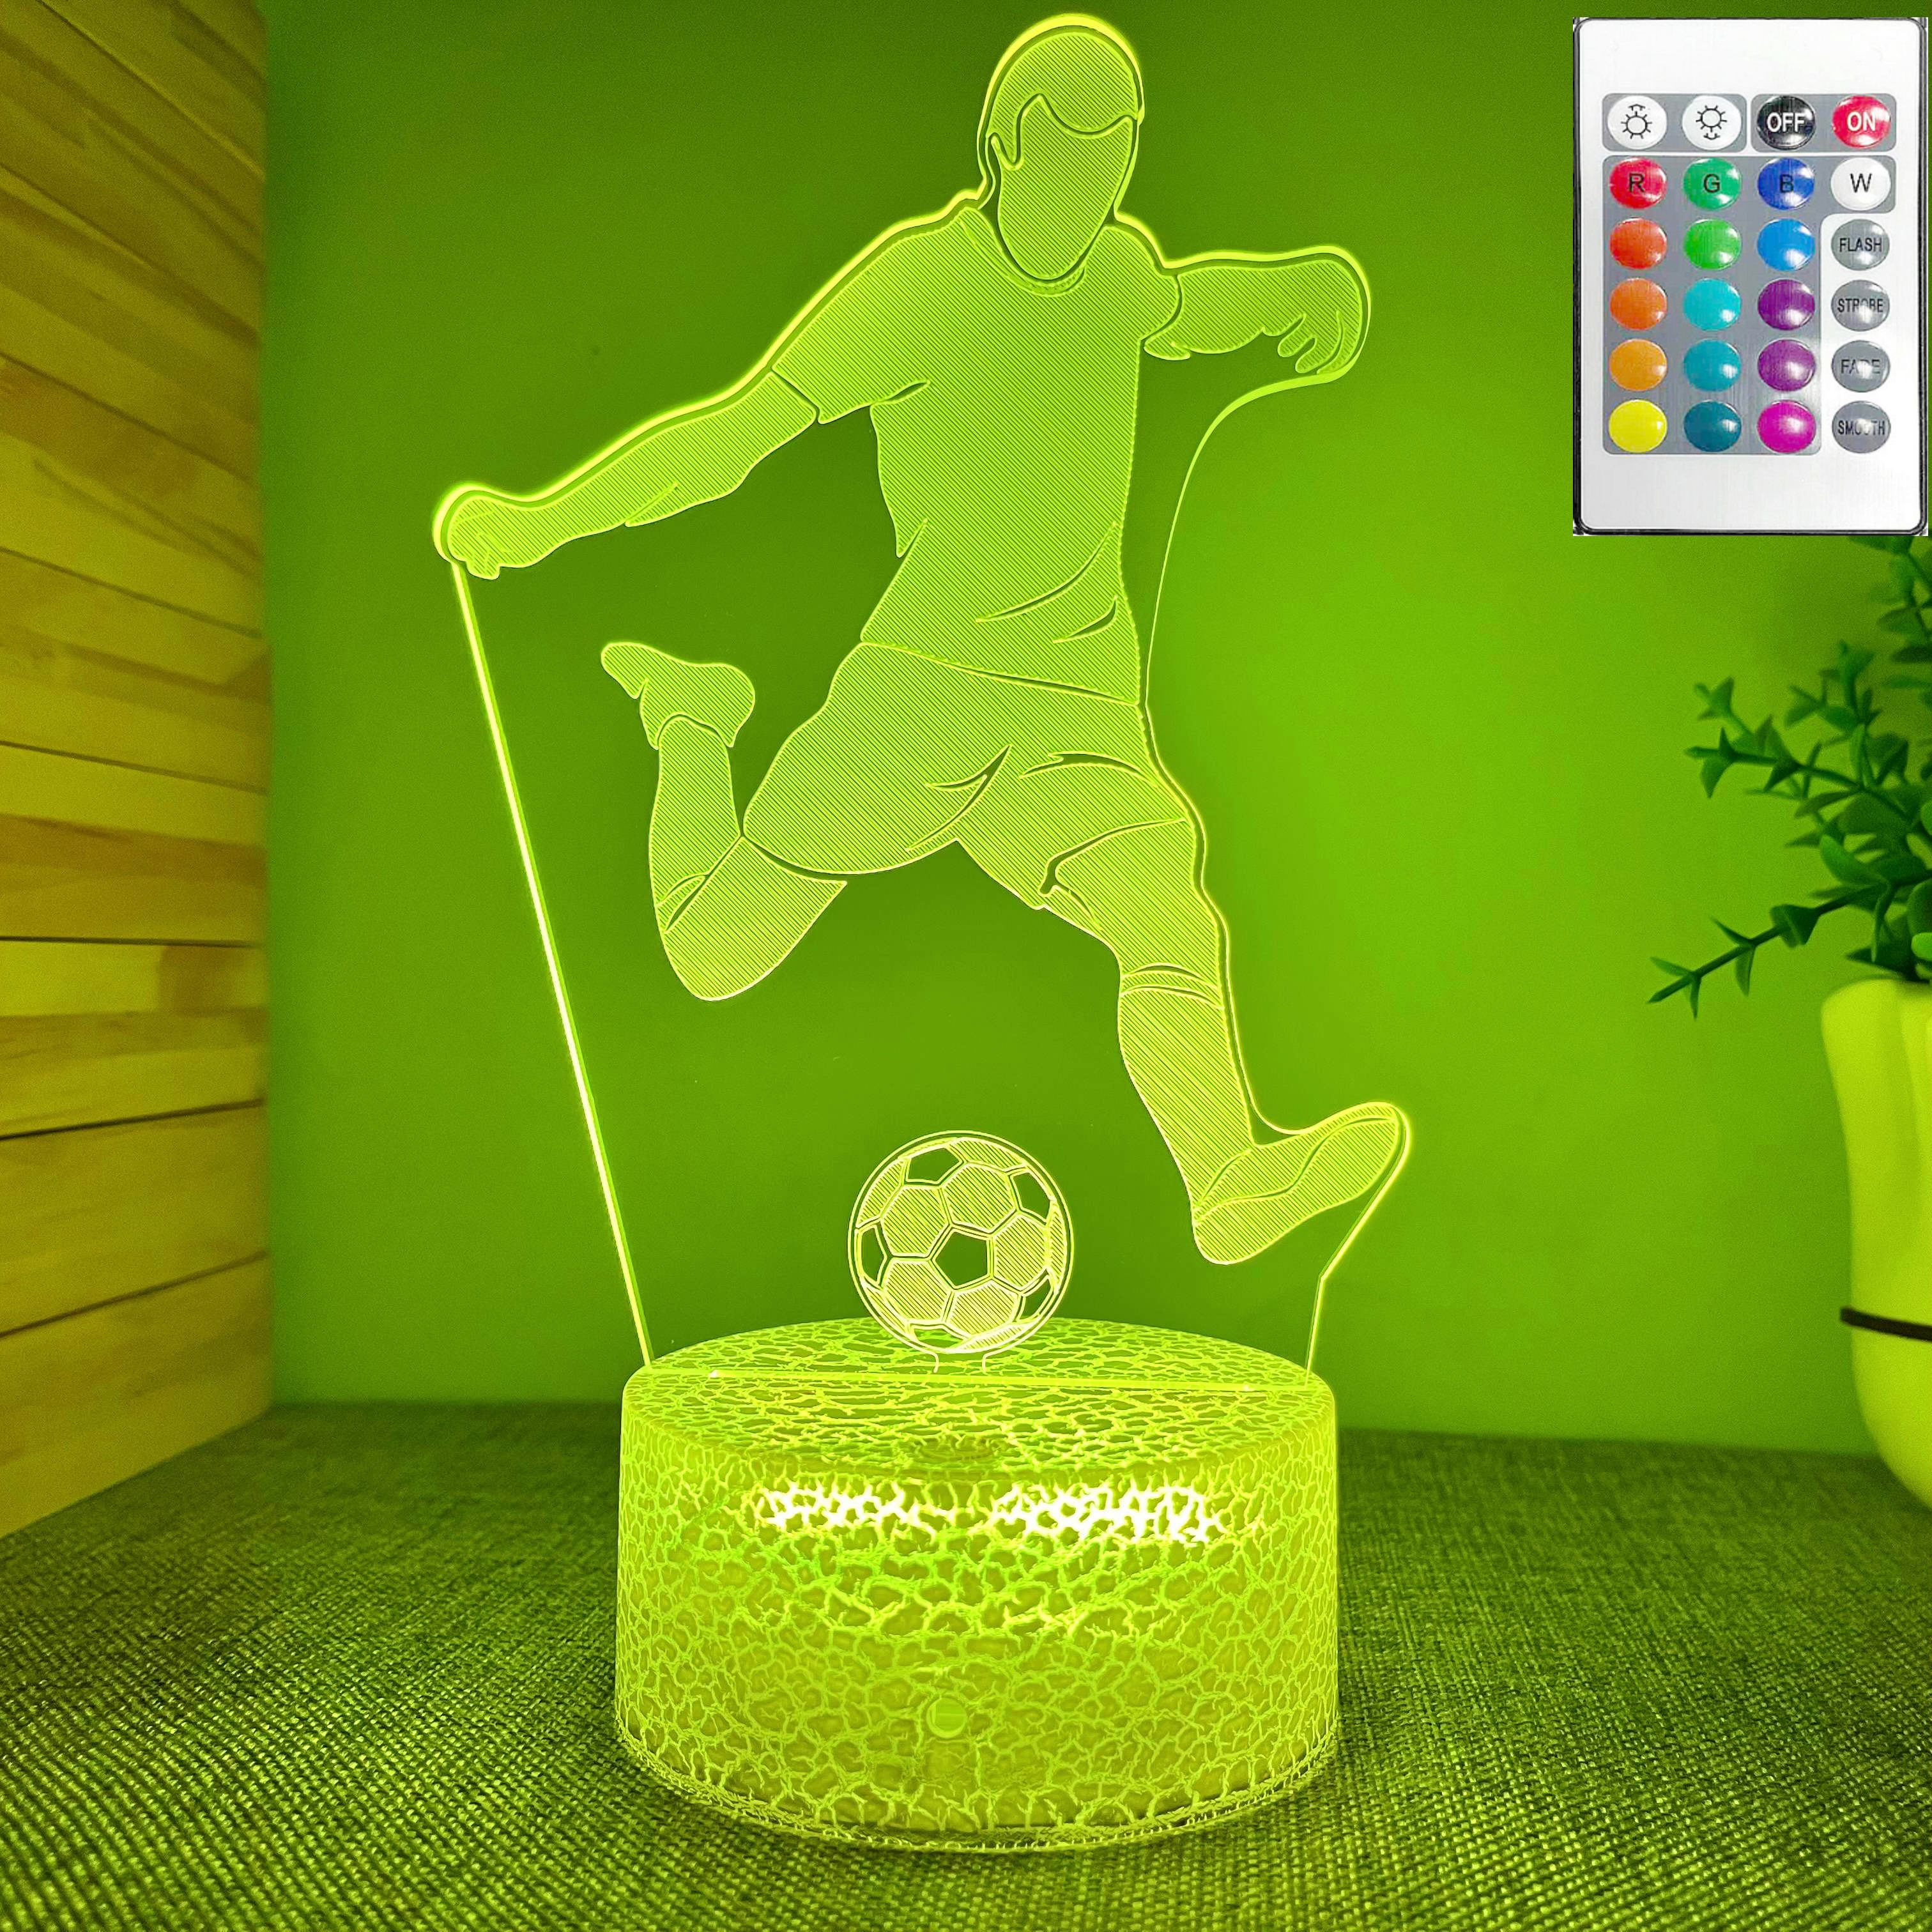 Football Table Lamp with USB